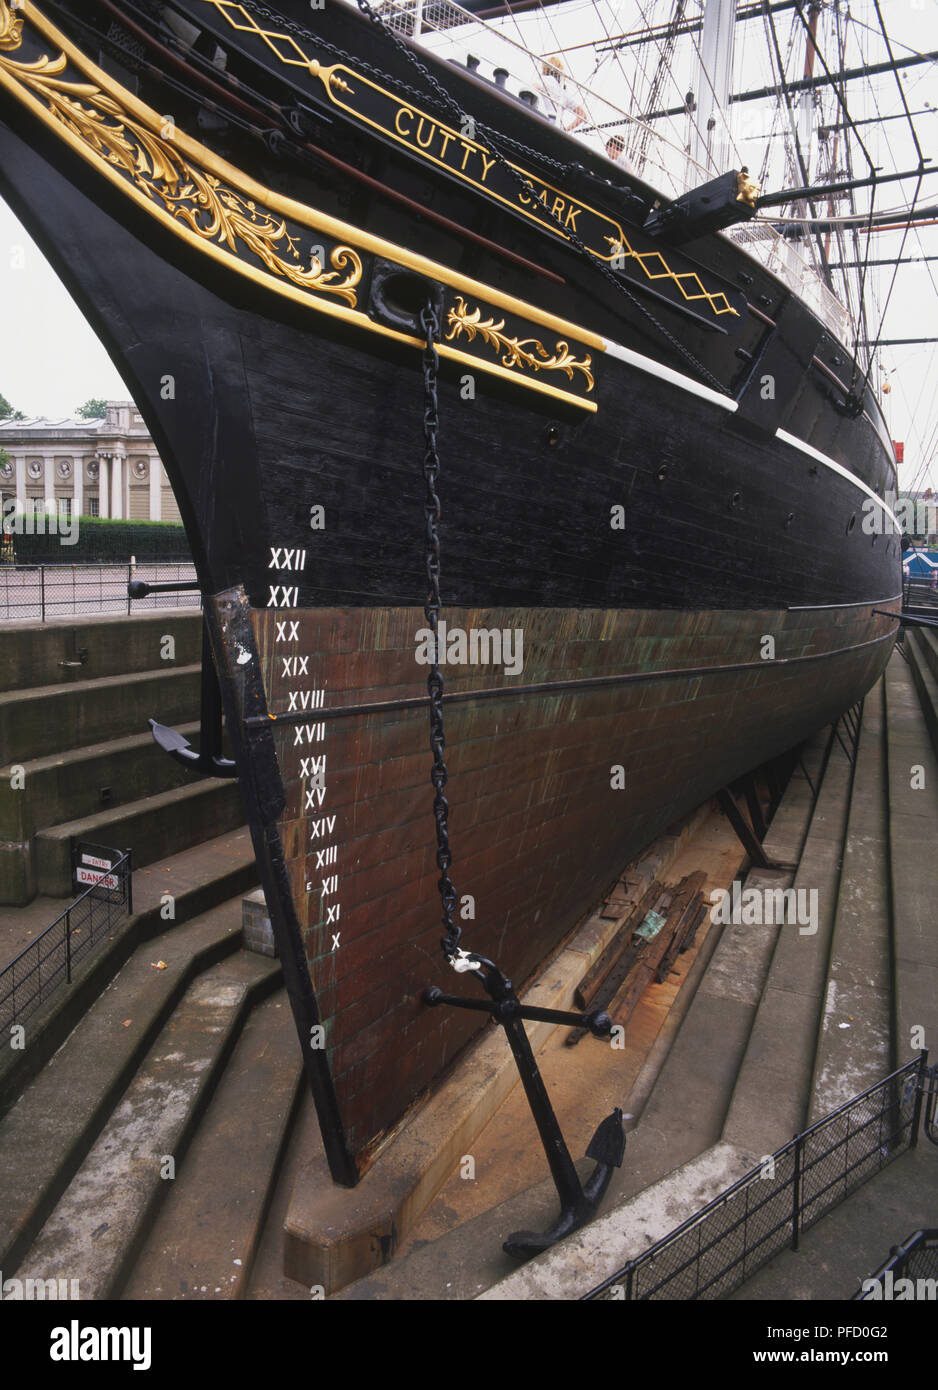 Great Britain, England, London, the Cutty Sark, bow of ship on dry dock. Stock Photo